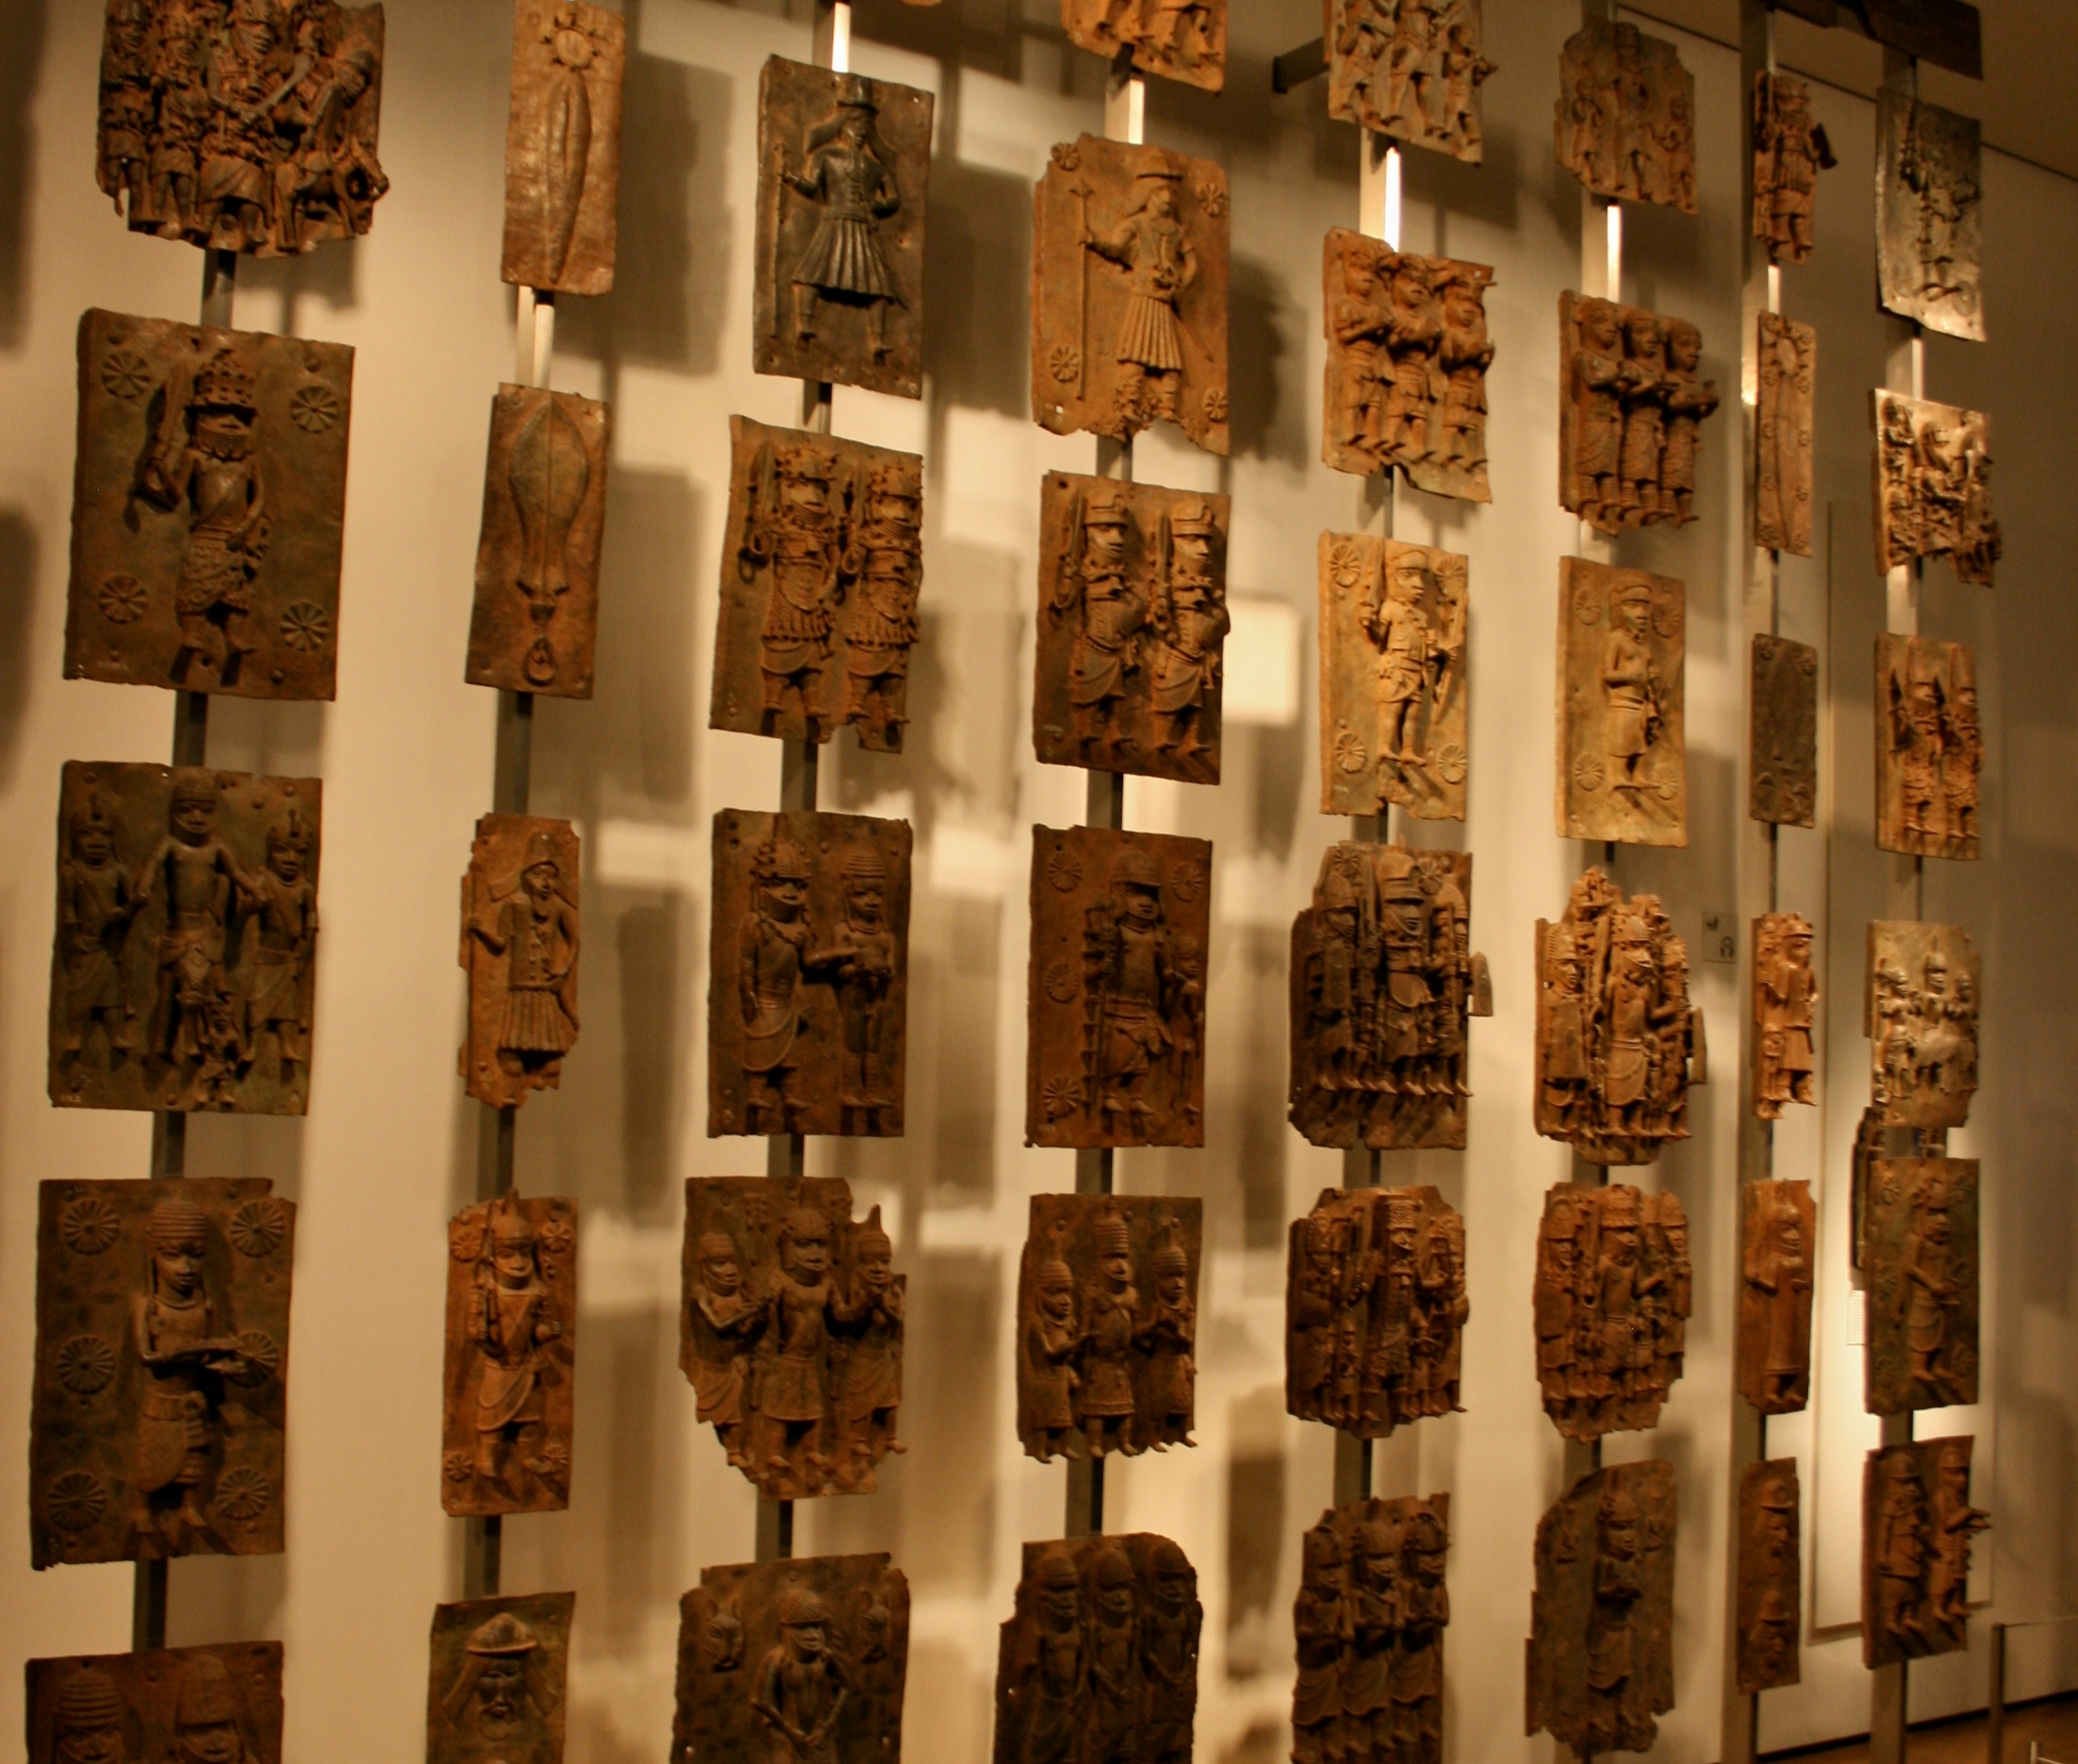 Part of the famous collection of the Benin Bronzes at the British Museum.